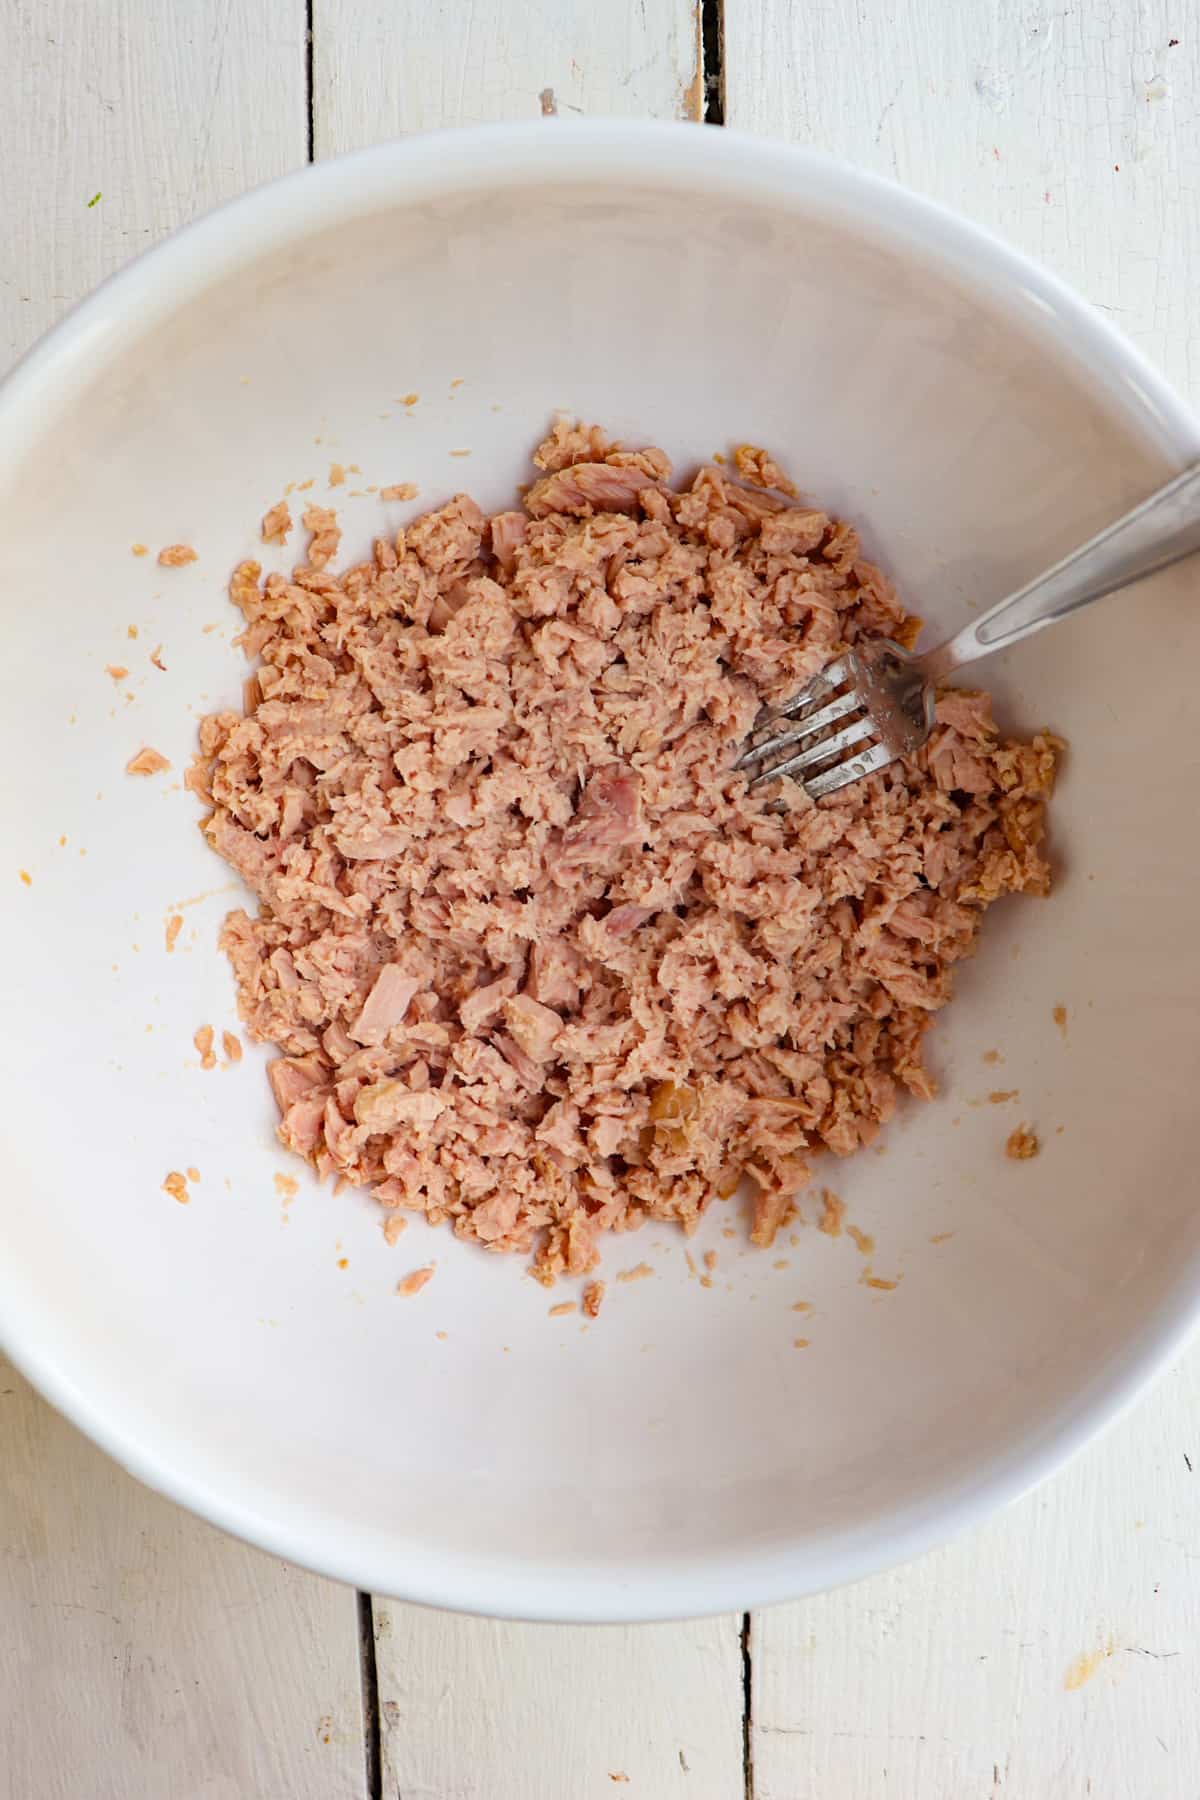 tuna in a bowl being mashed with a fork.